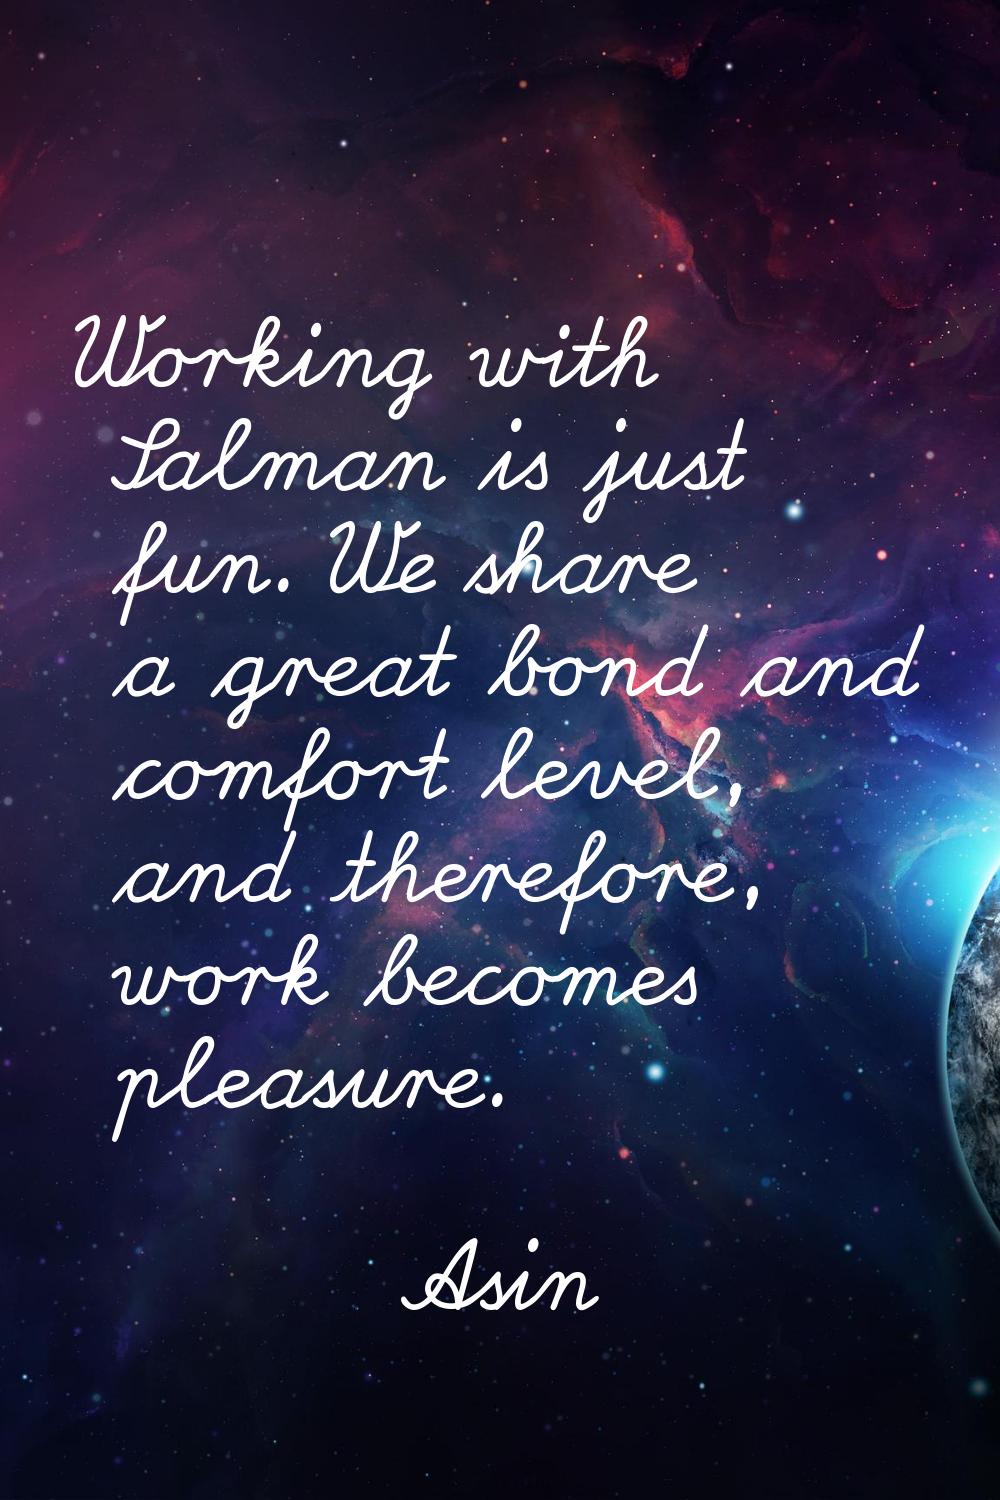 Working with Salman is just fun. We share a great bond and comfort level, and therefore, work becom